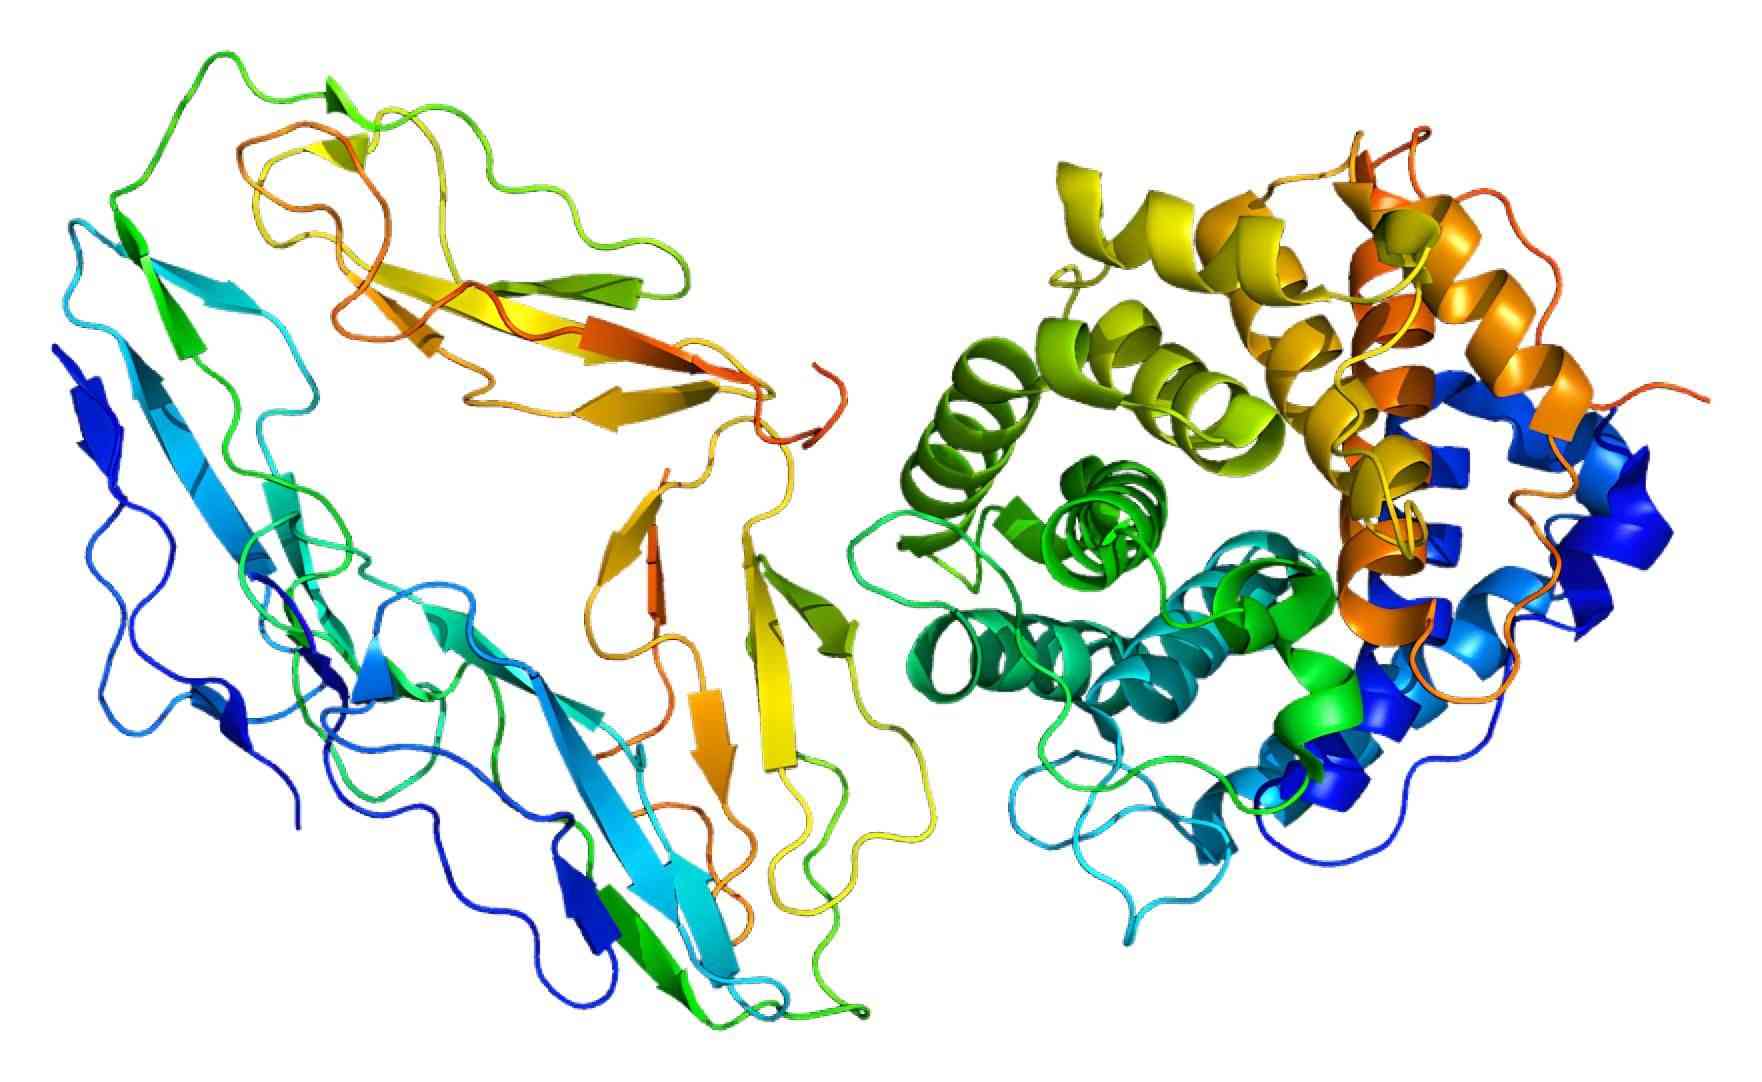 Fig. 1 CR2 3D structure. （By Emw - Own work, https://commons.wikimedia.org/wiki/File:Protein_CR2_PDB_1ghq.png)